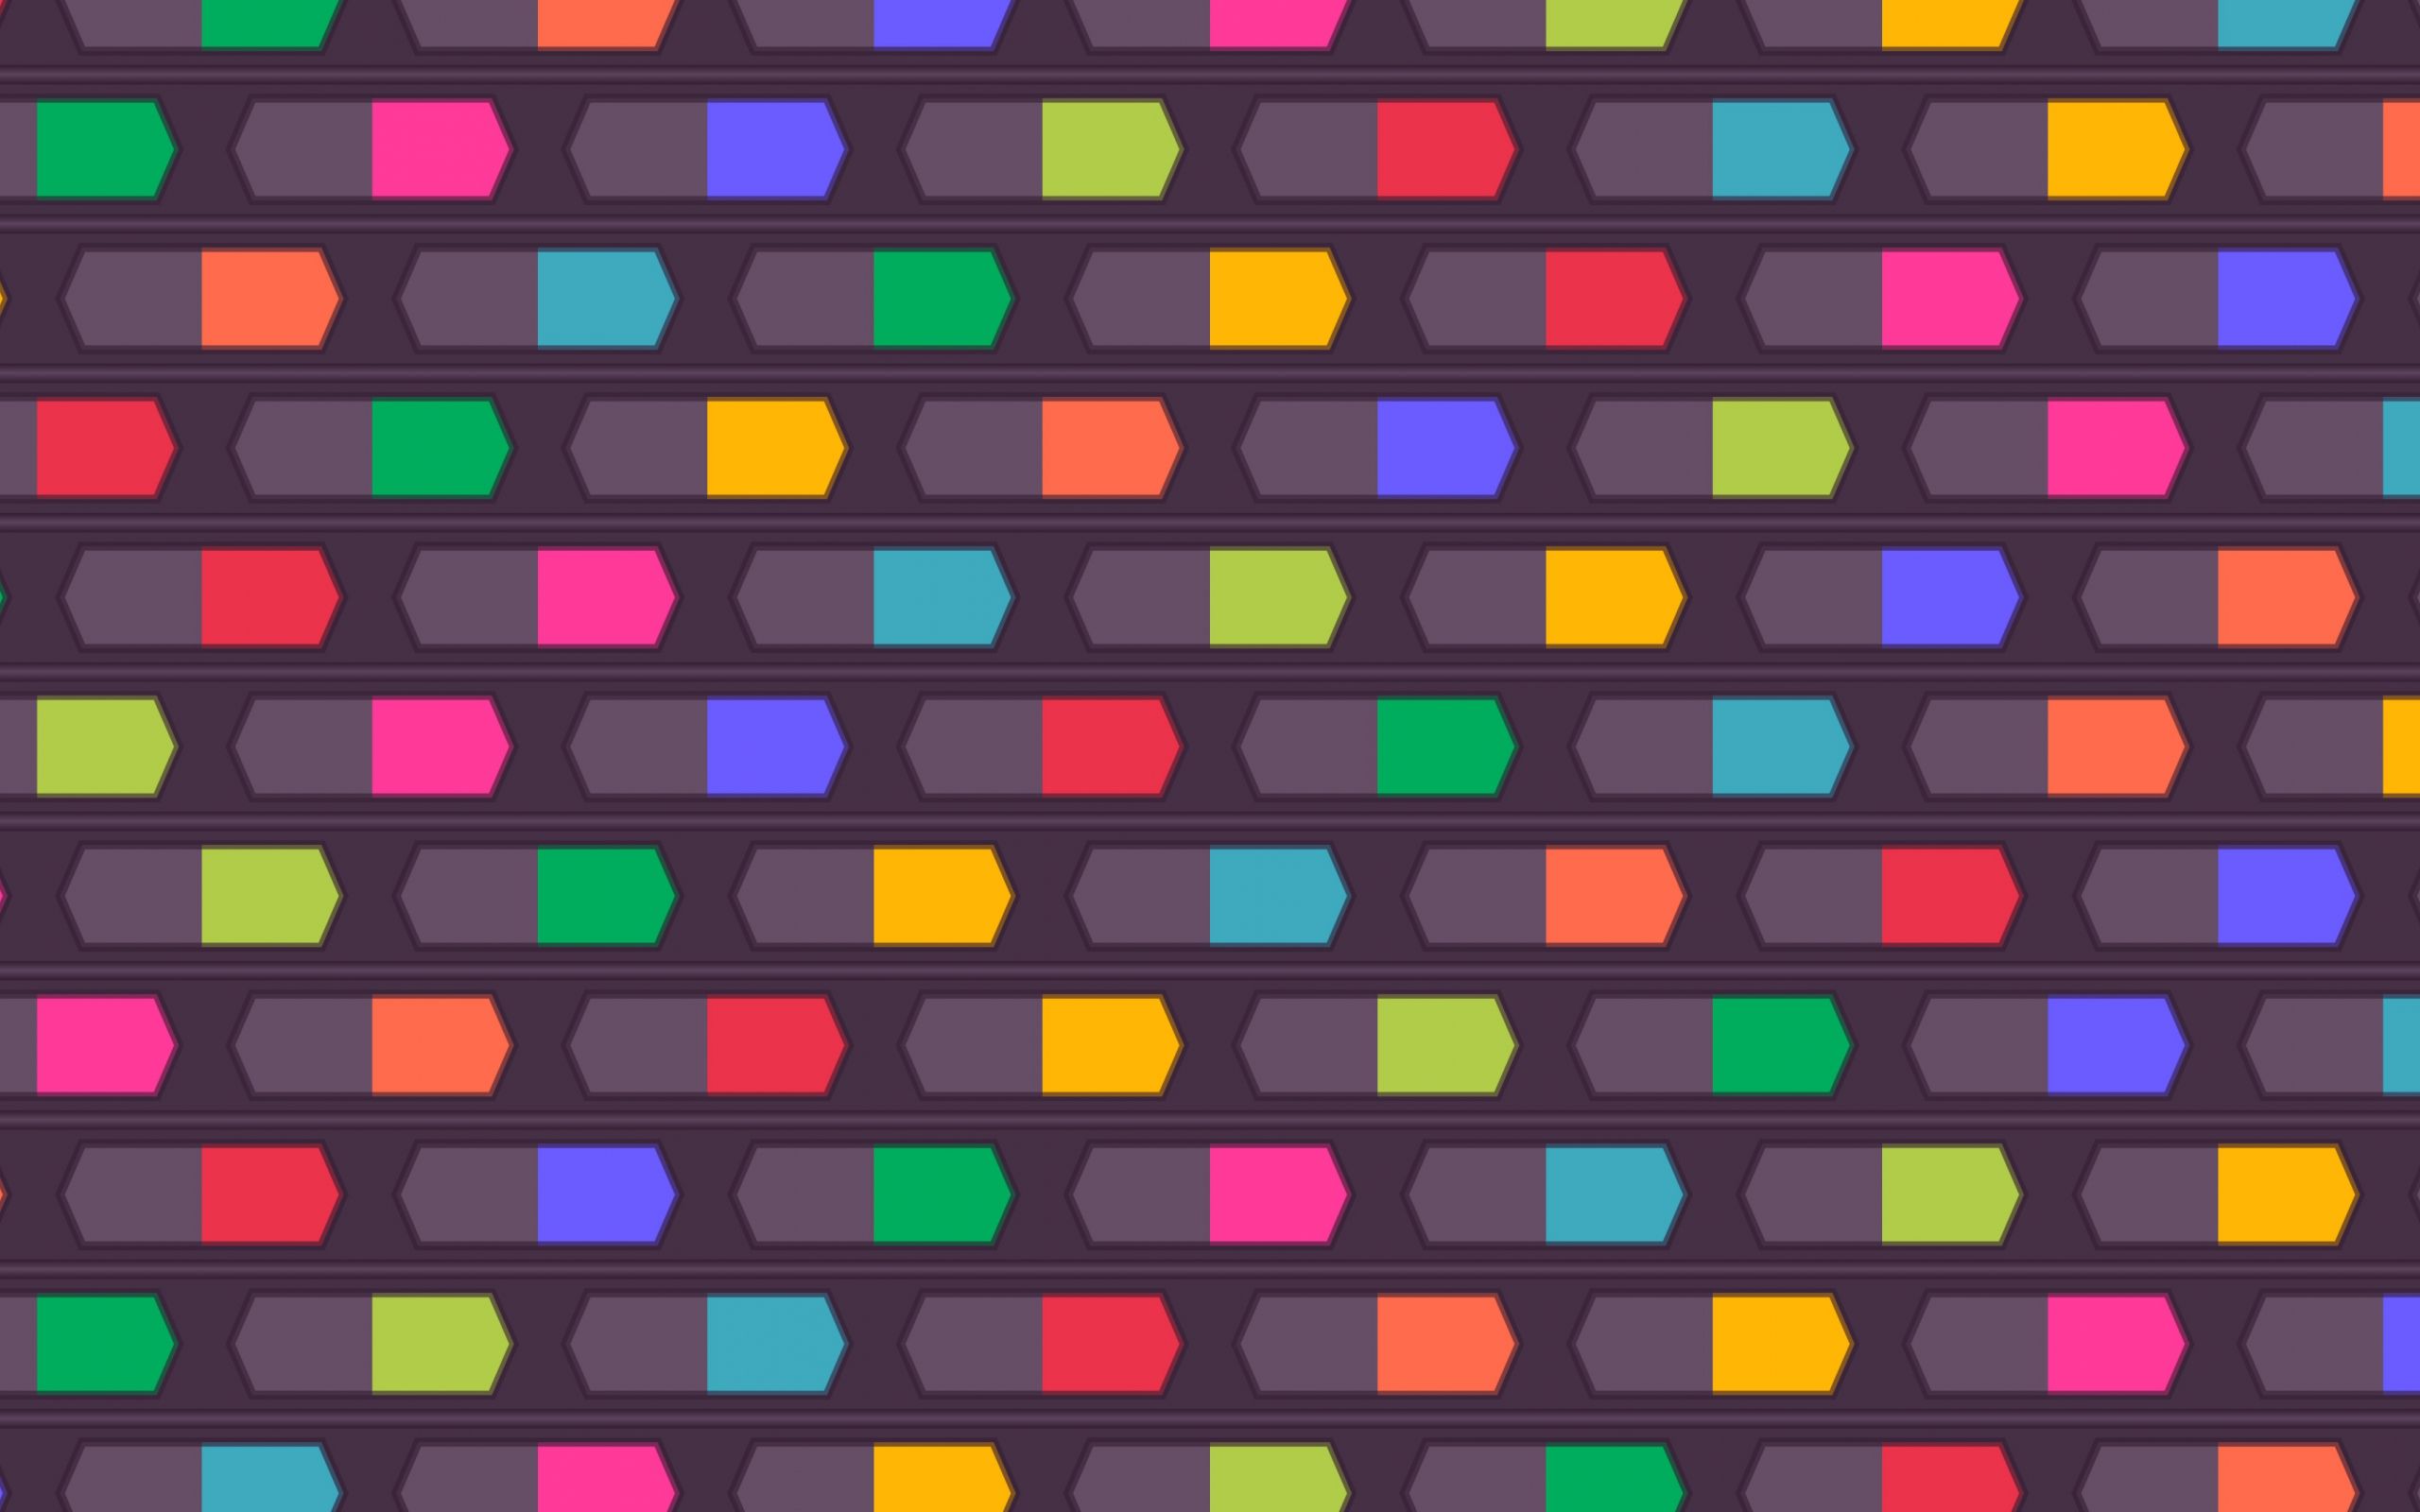 Desktop Wallpaper Colorful Texture Shapes, HD Image, Picture, Background, Kubsyk